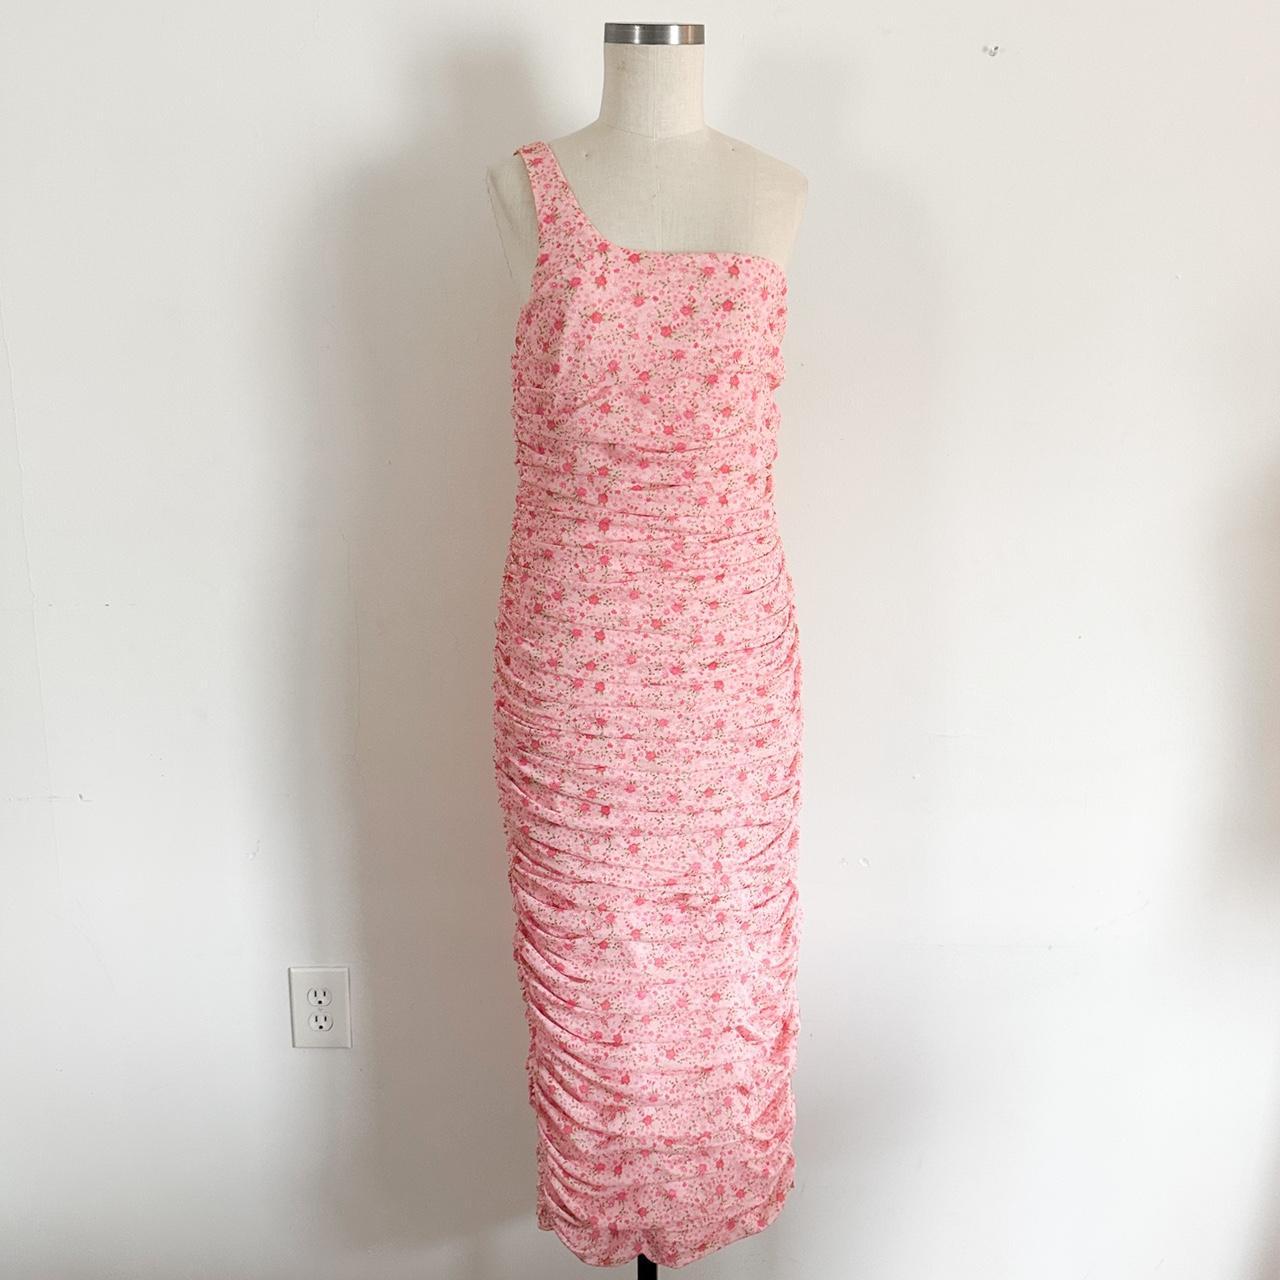 LIKELY Women's Pink and Red Dress | Depop